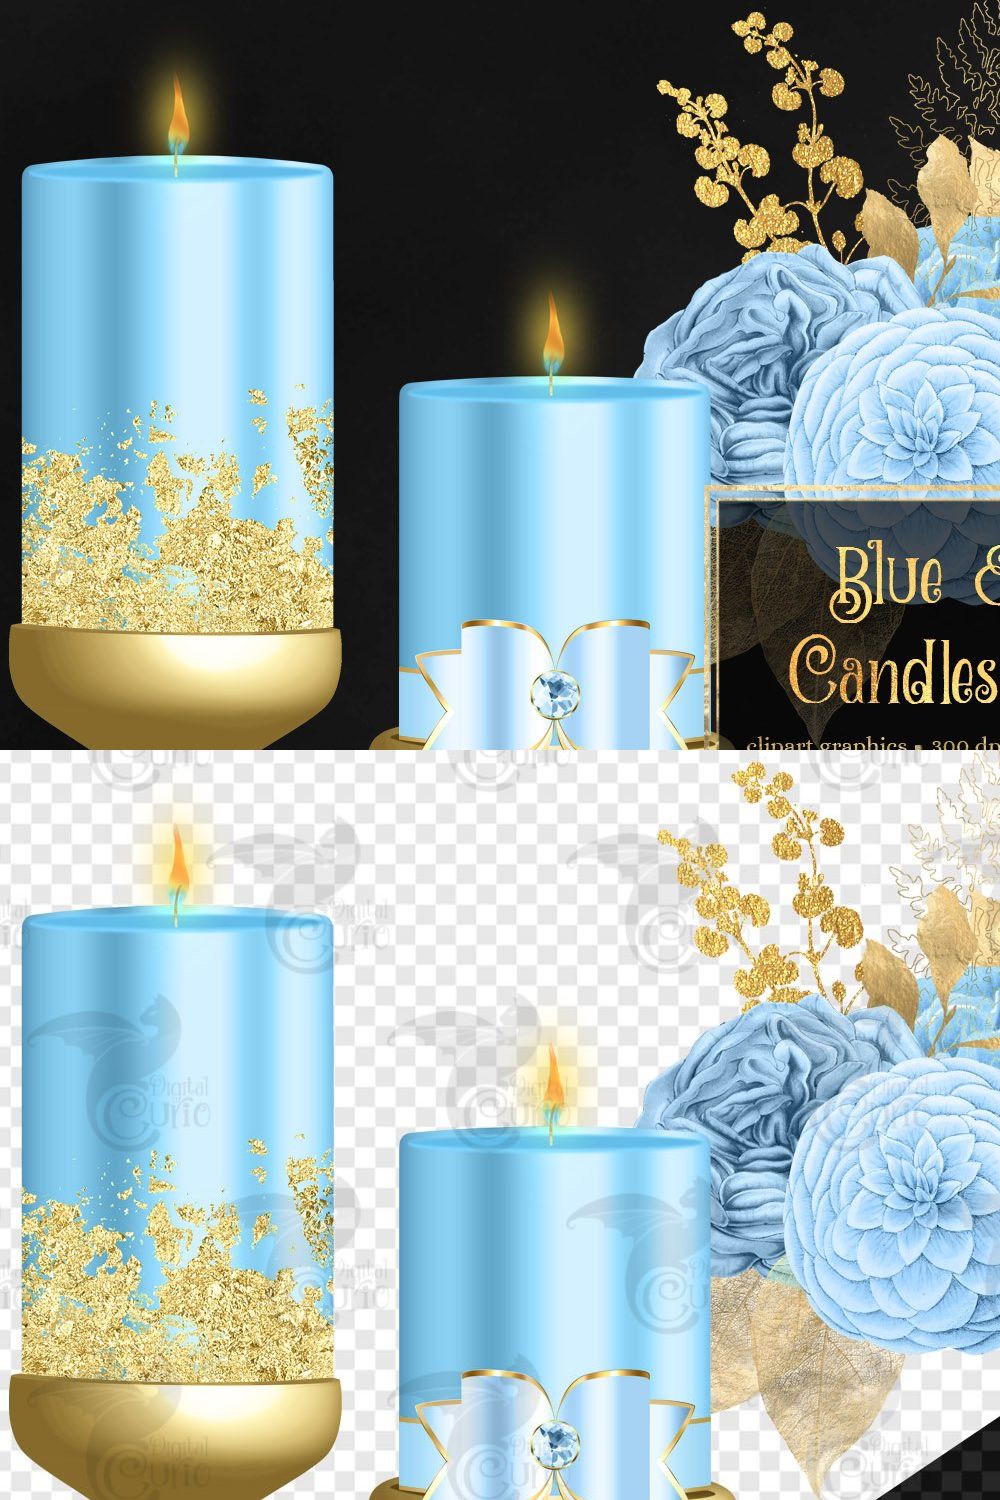 Blue and Gold Candles Clipart pinterest preview image.